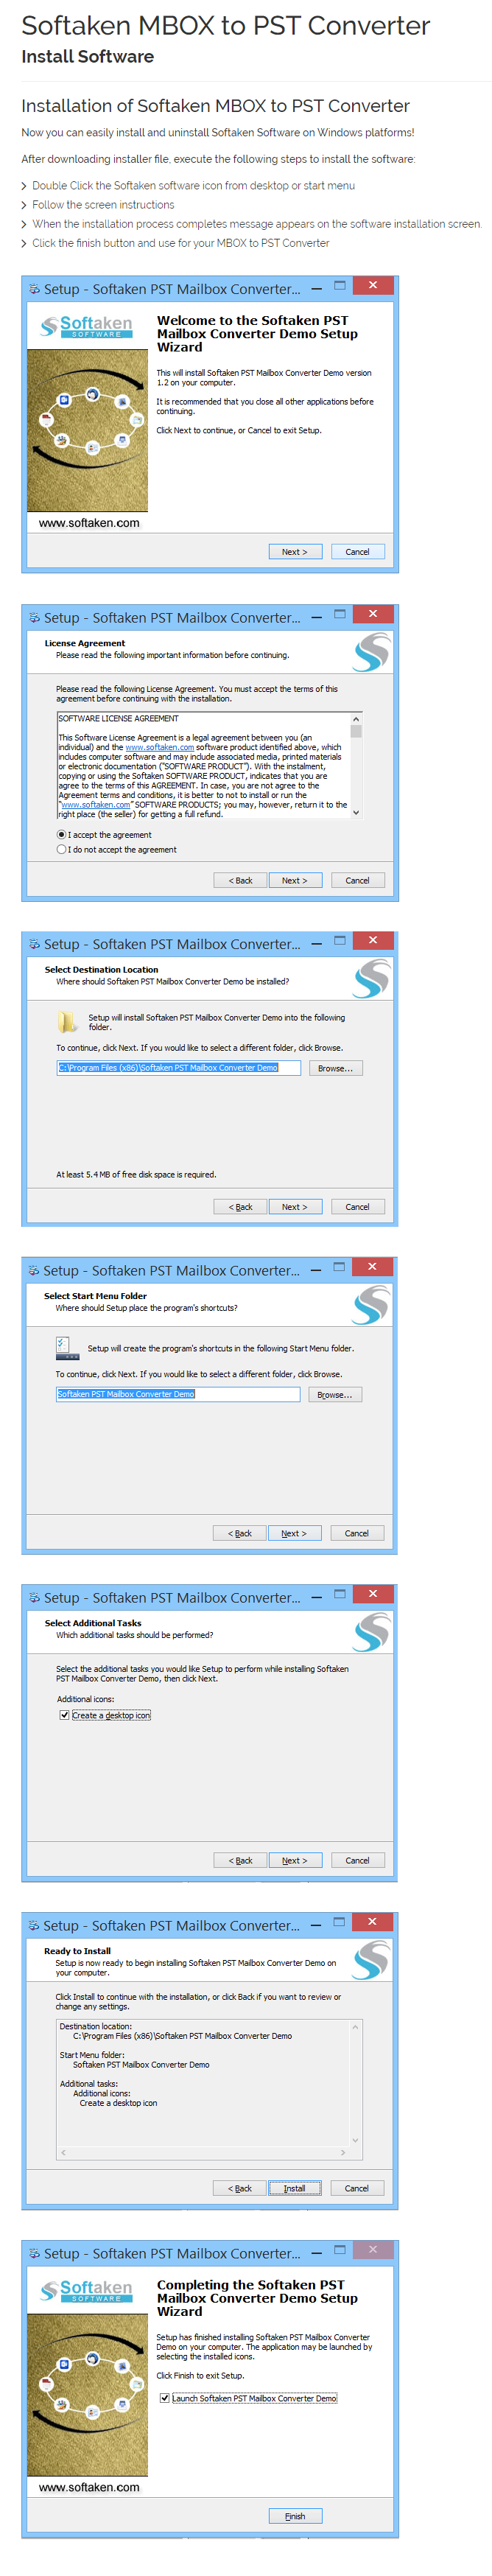 MBOX to PST Converter Installation